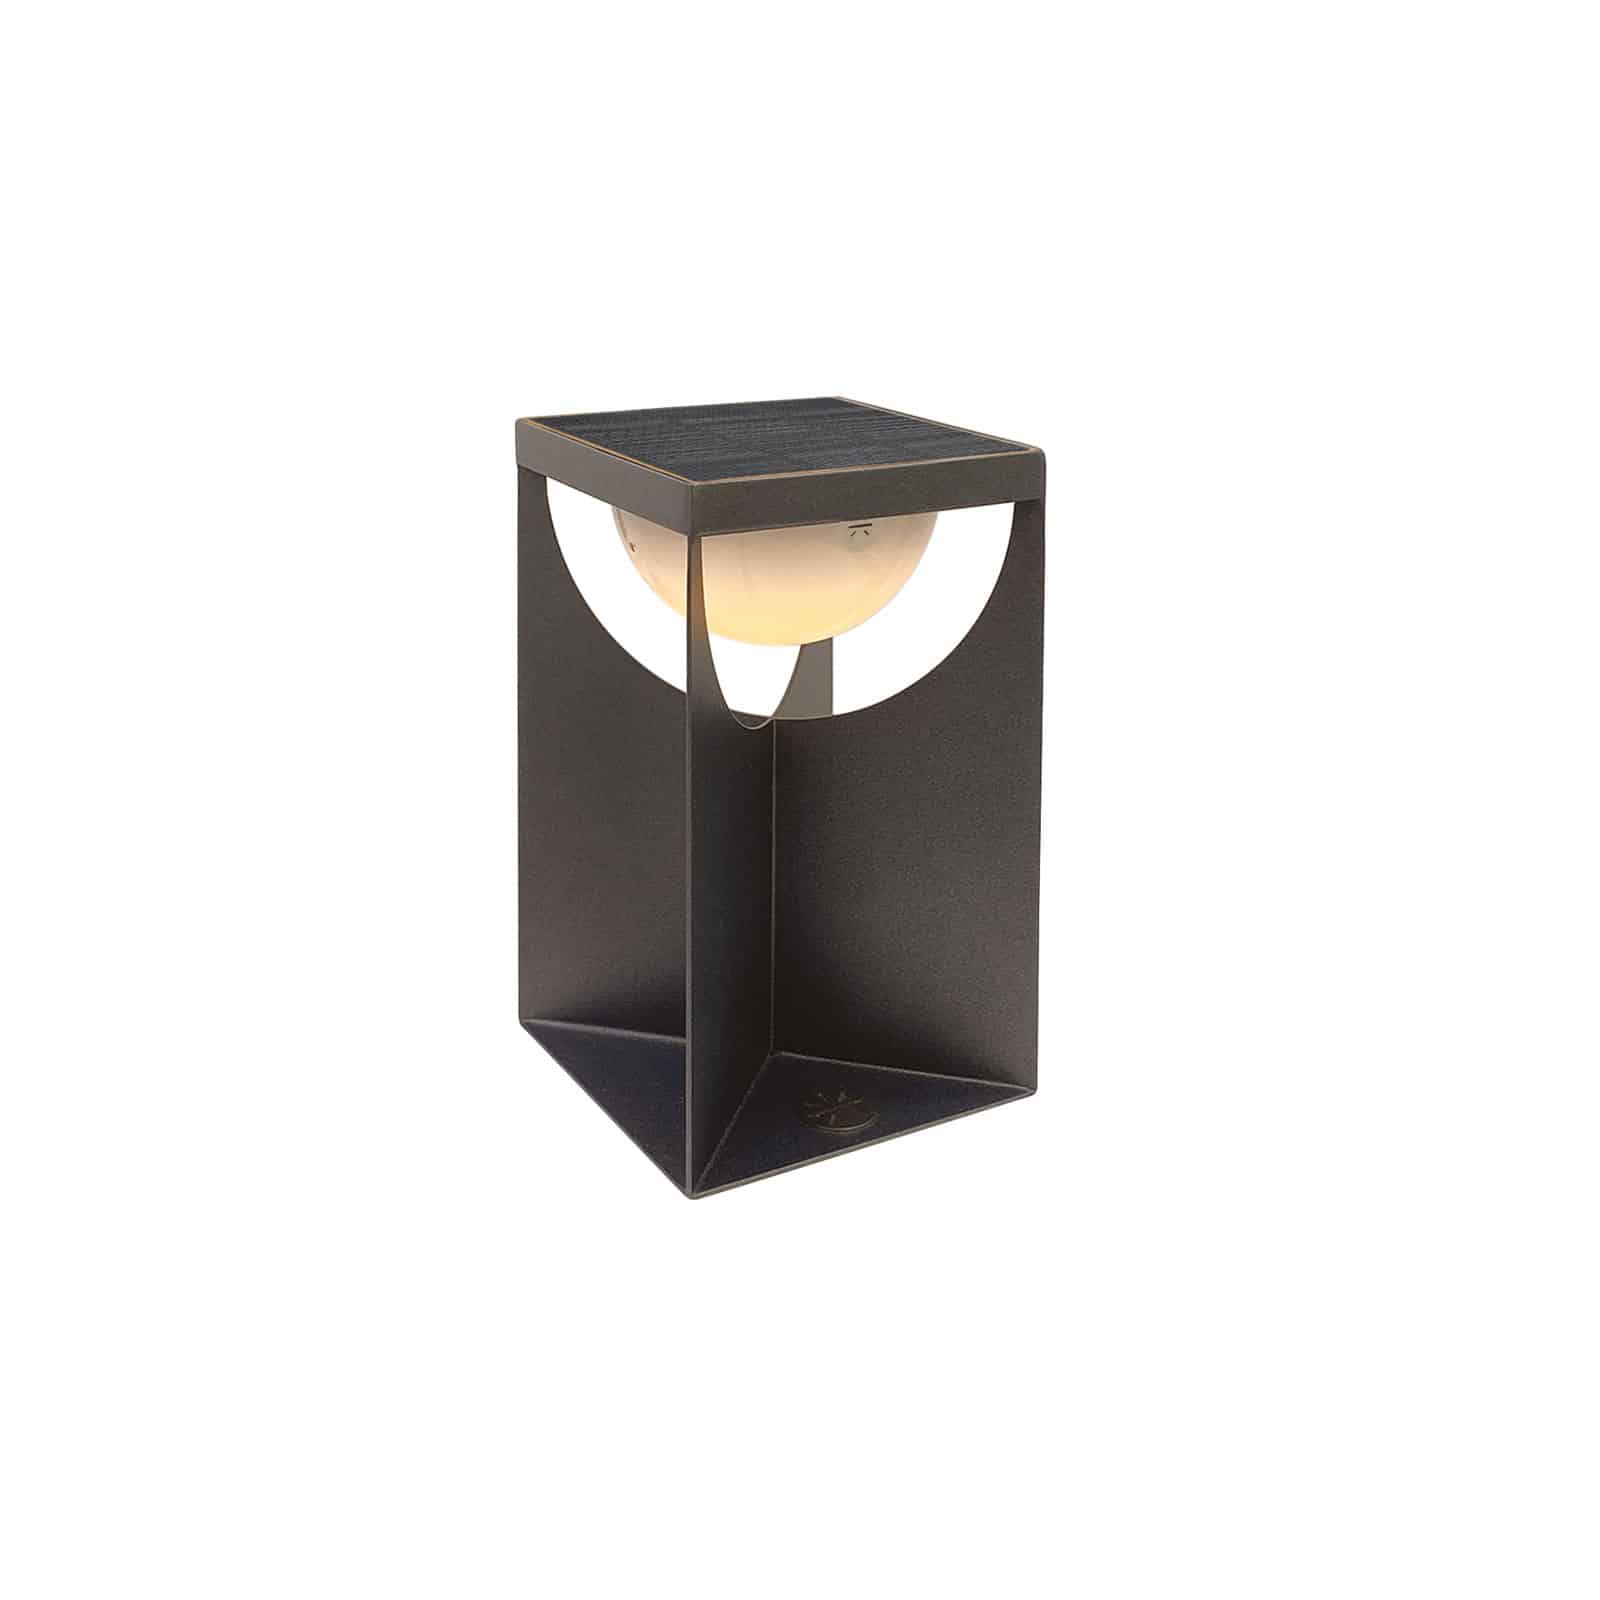 Flow table lamp in cafe finish